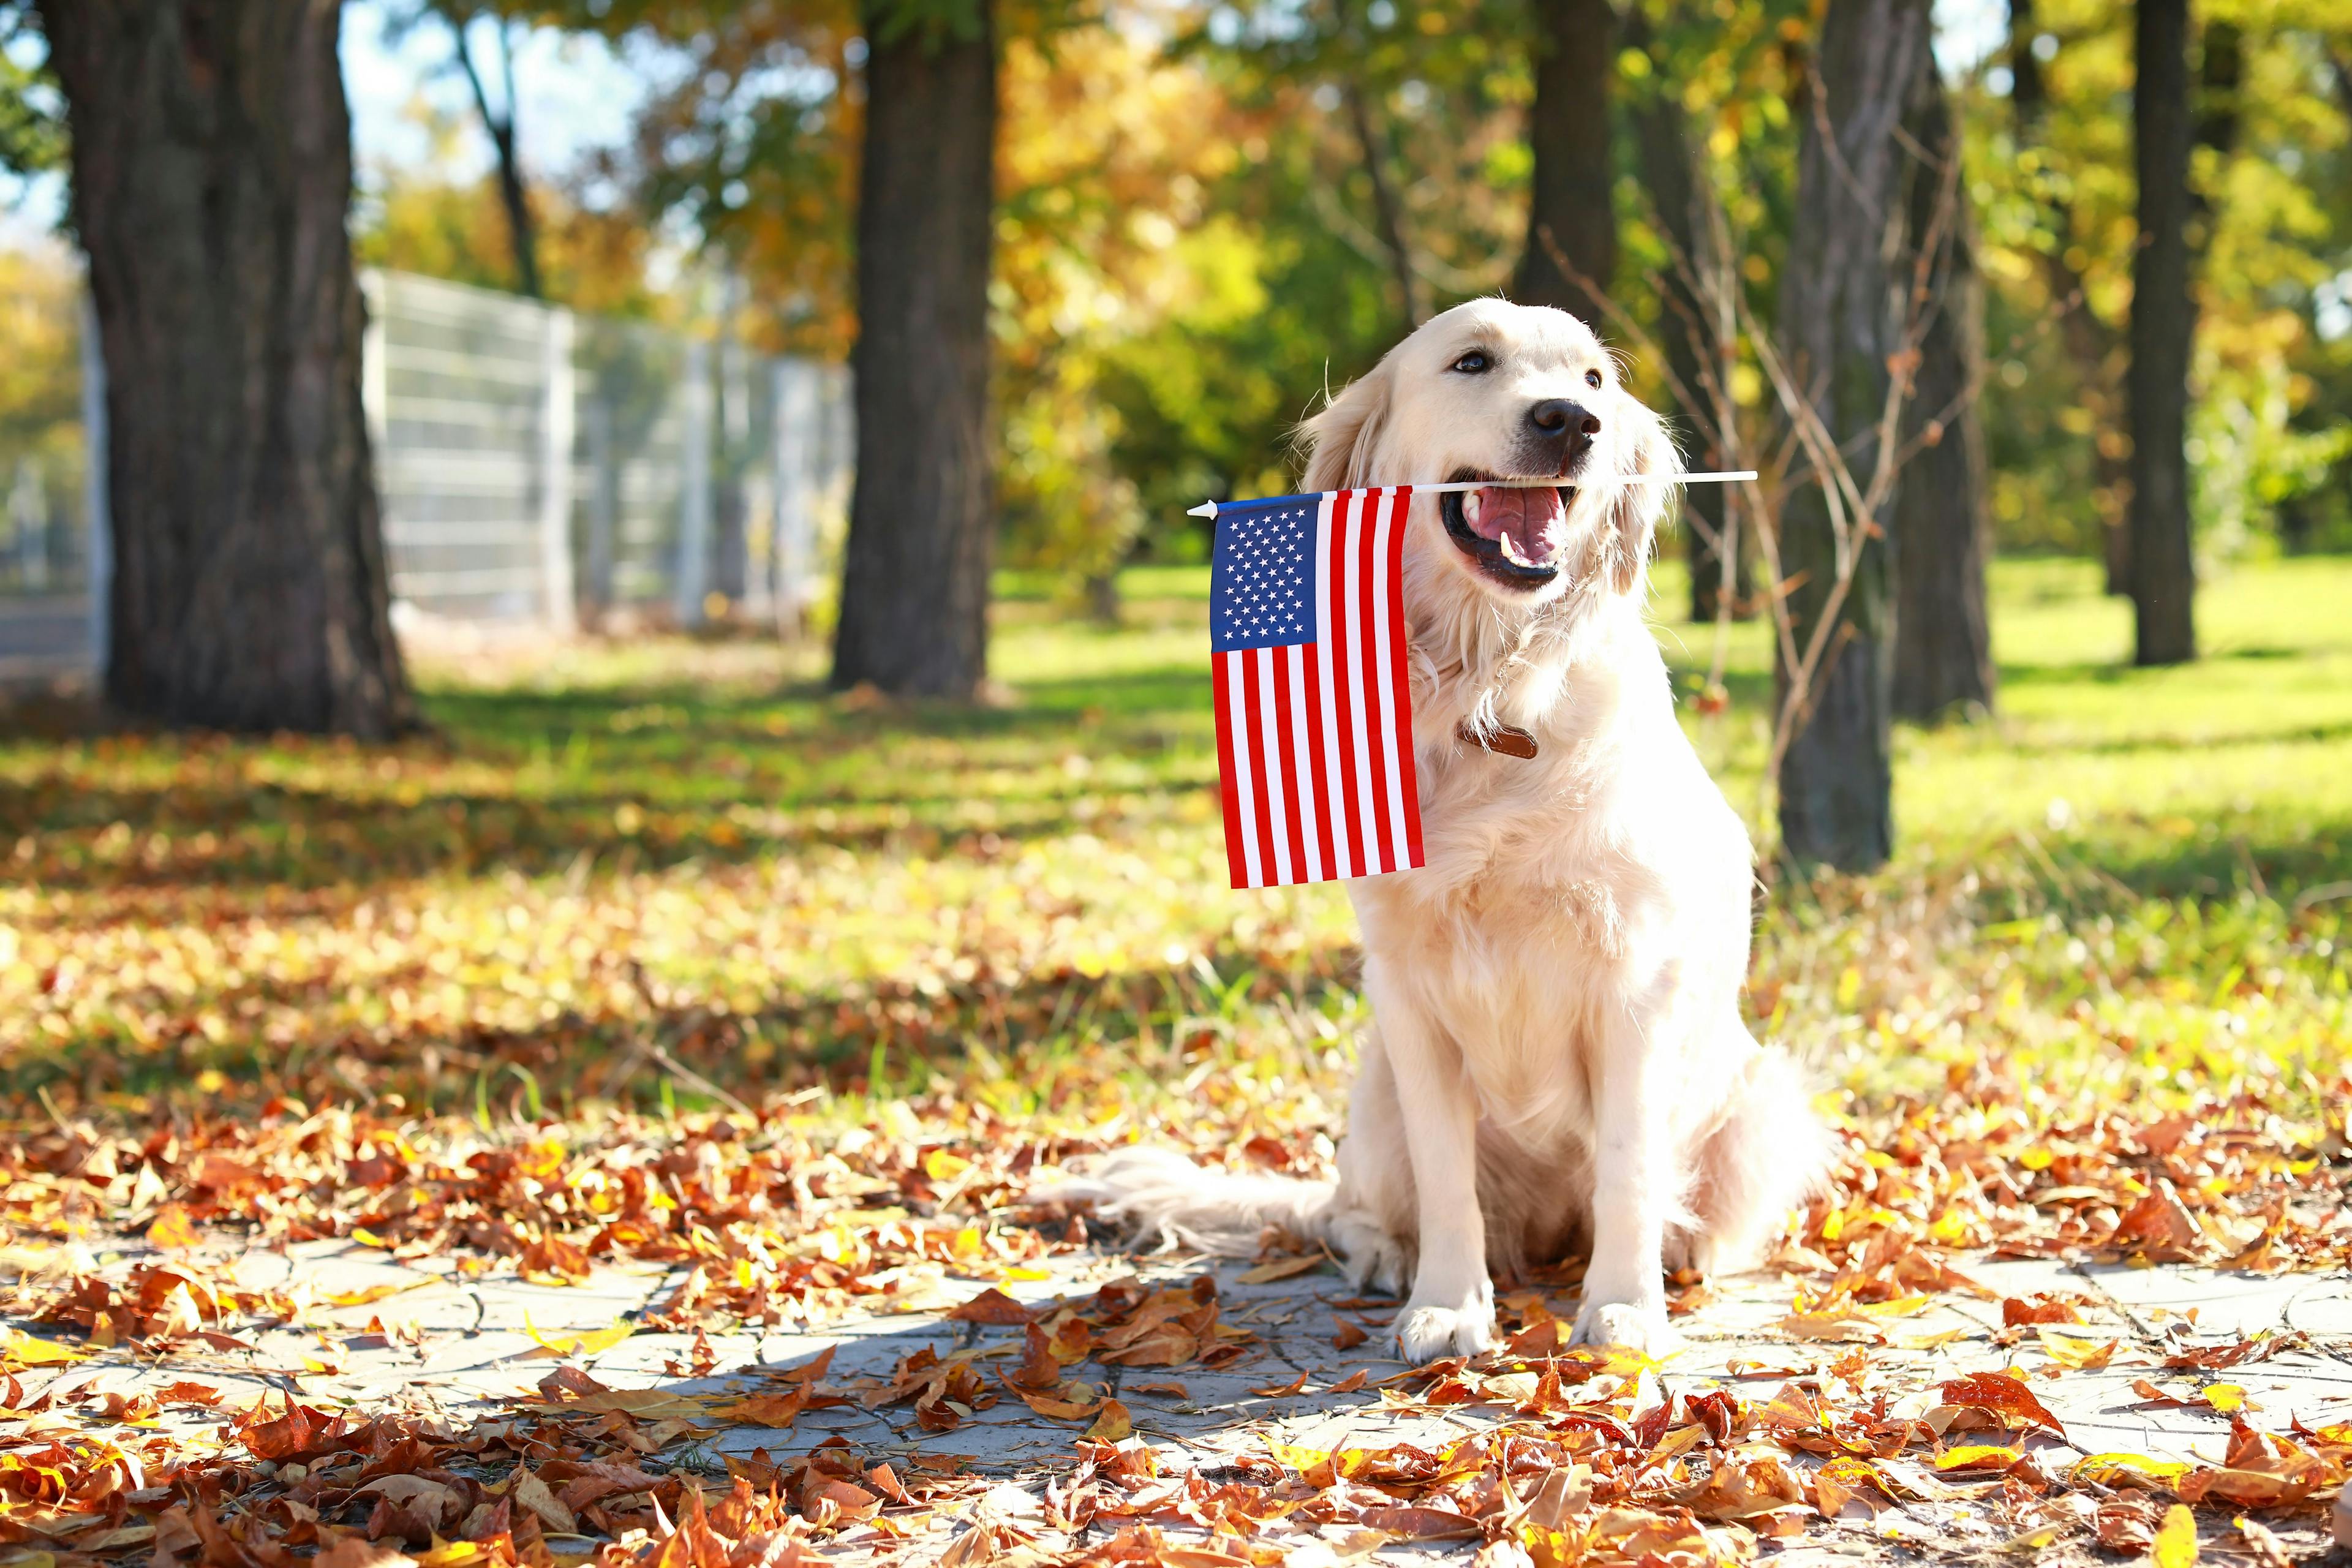 Petco Love donates $1 million to Helping Heroes this Veterans Day 